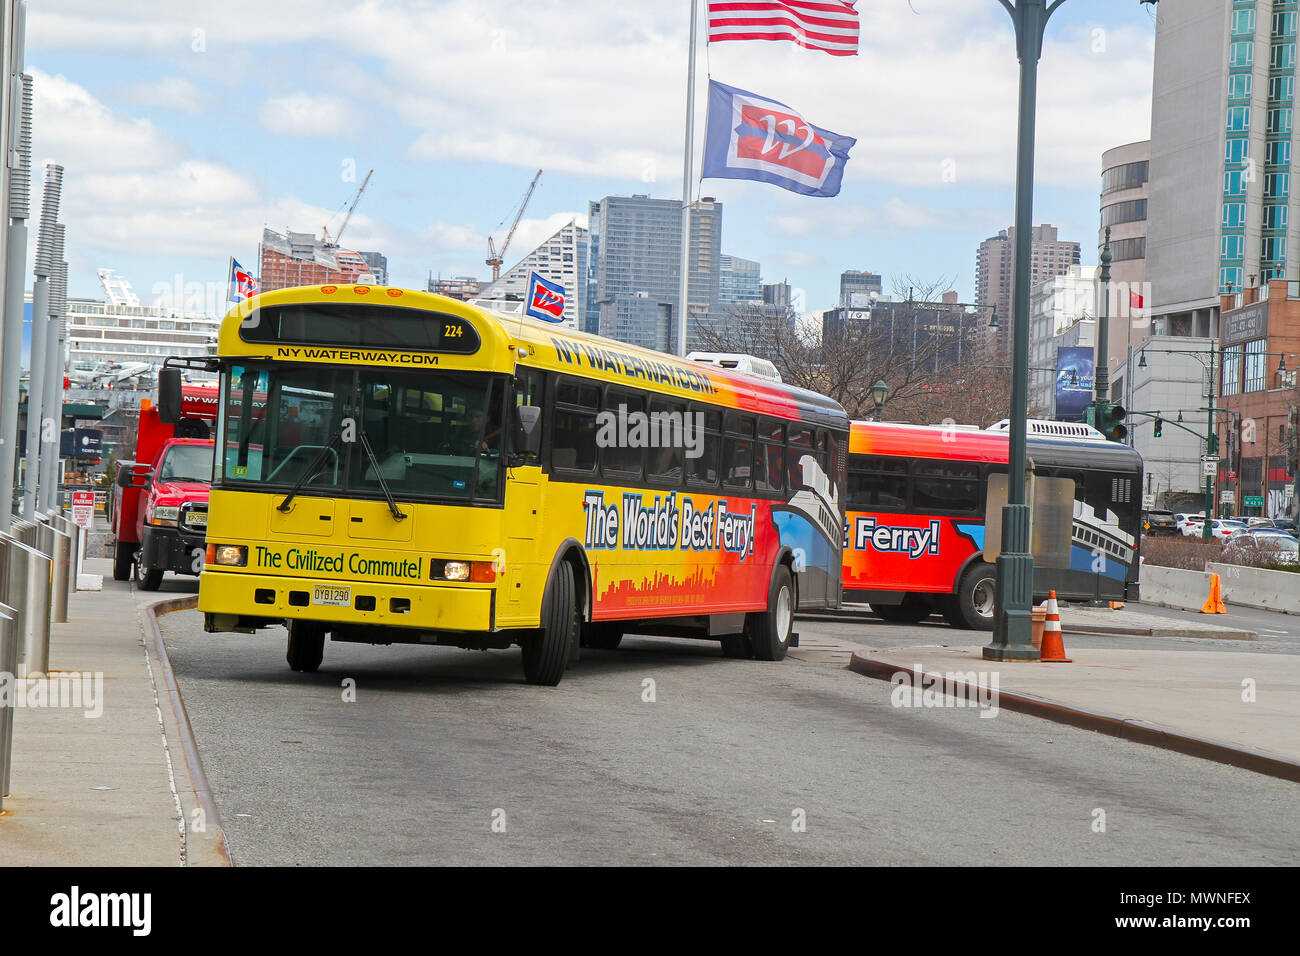 New York Waterway busses bring visitors from the ferry terminal to ...